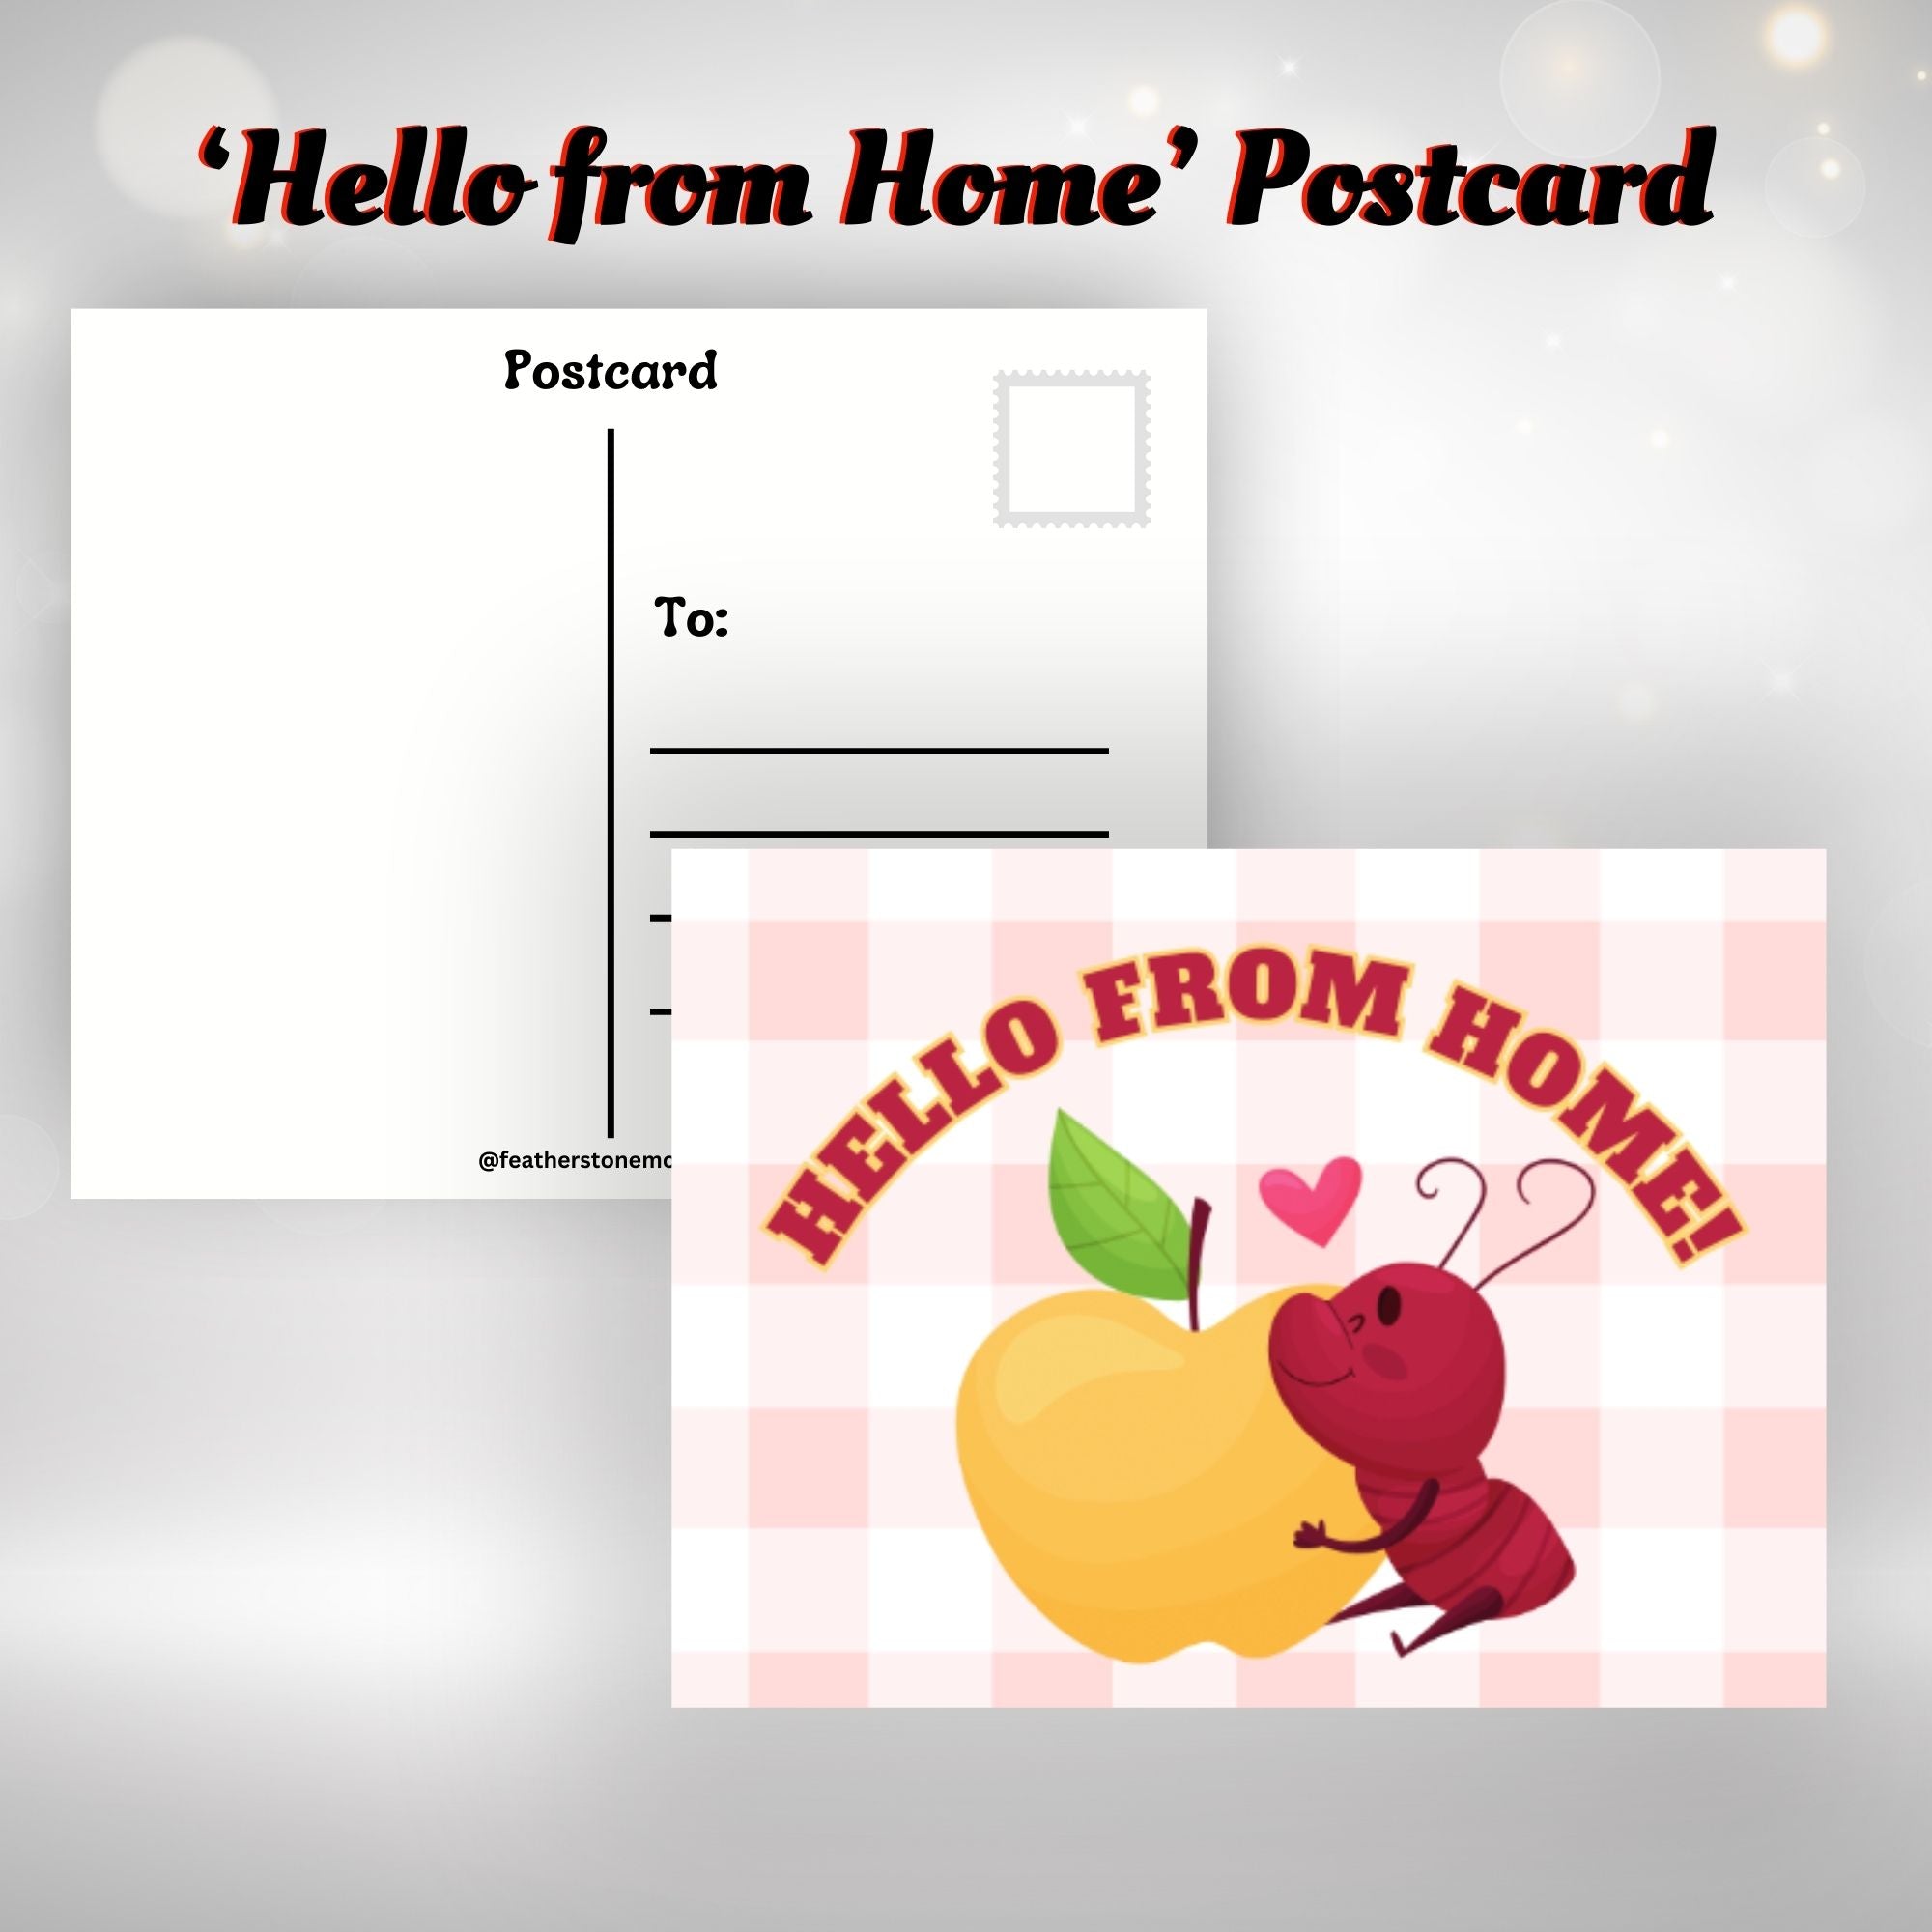 This image shows the Hello from Home! postcard with an ant holding a yellow apple.